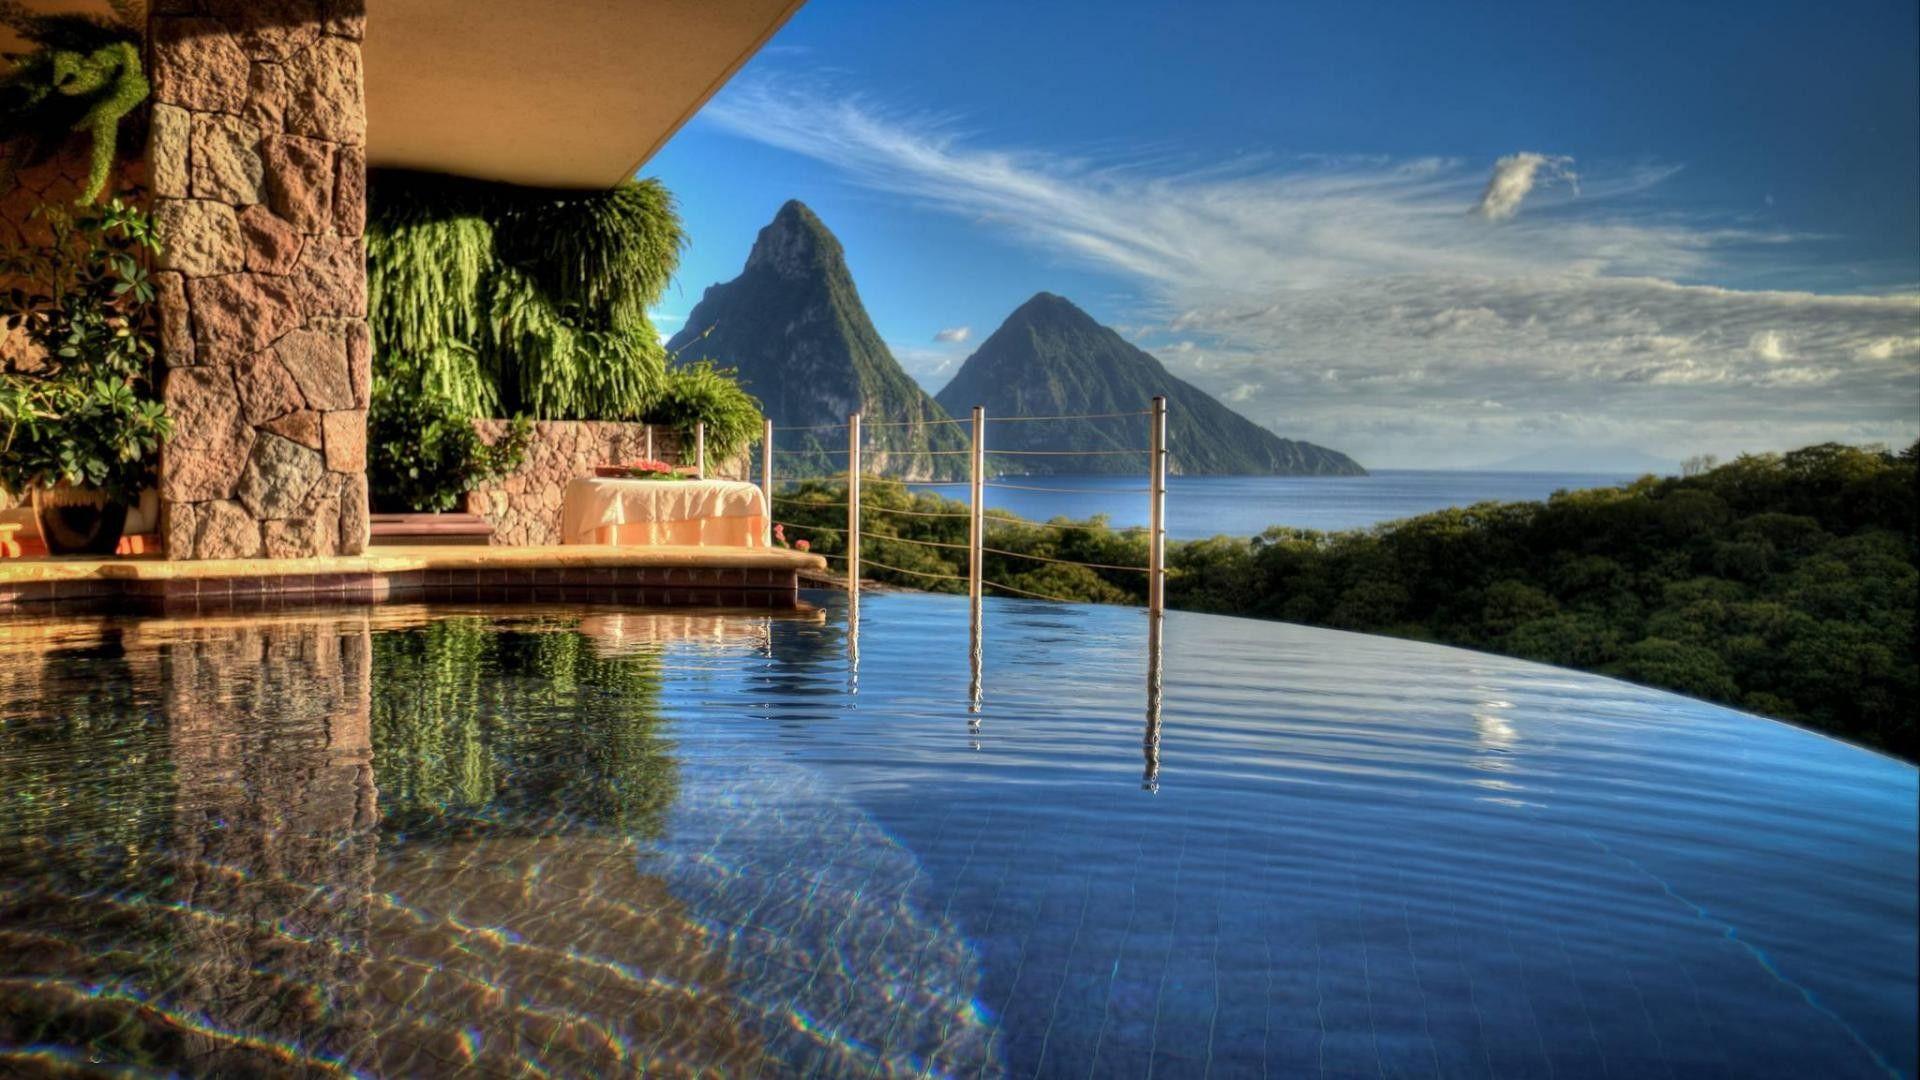 Other: Infinity Pool Resort Paradise Beautiful View St Lucia